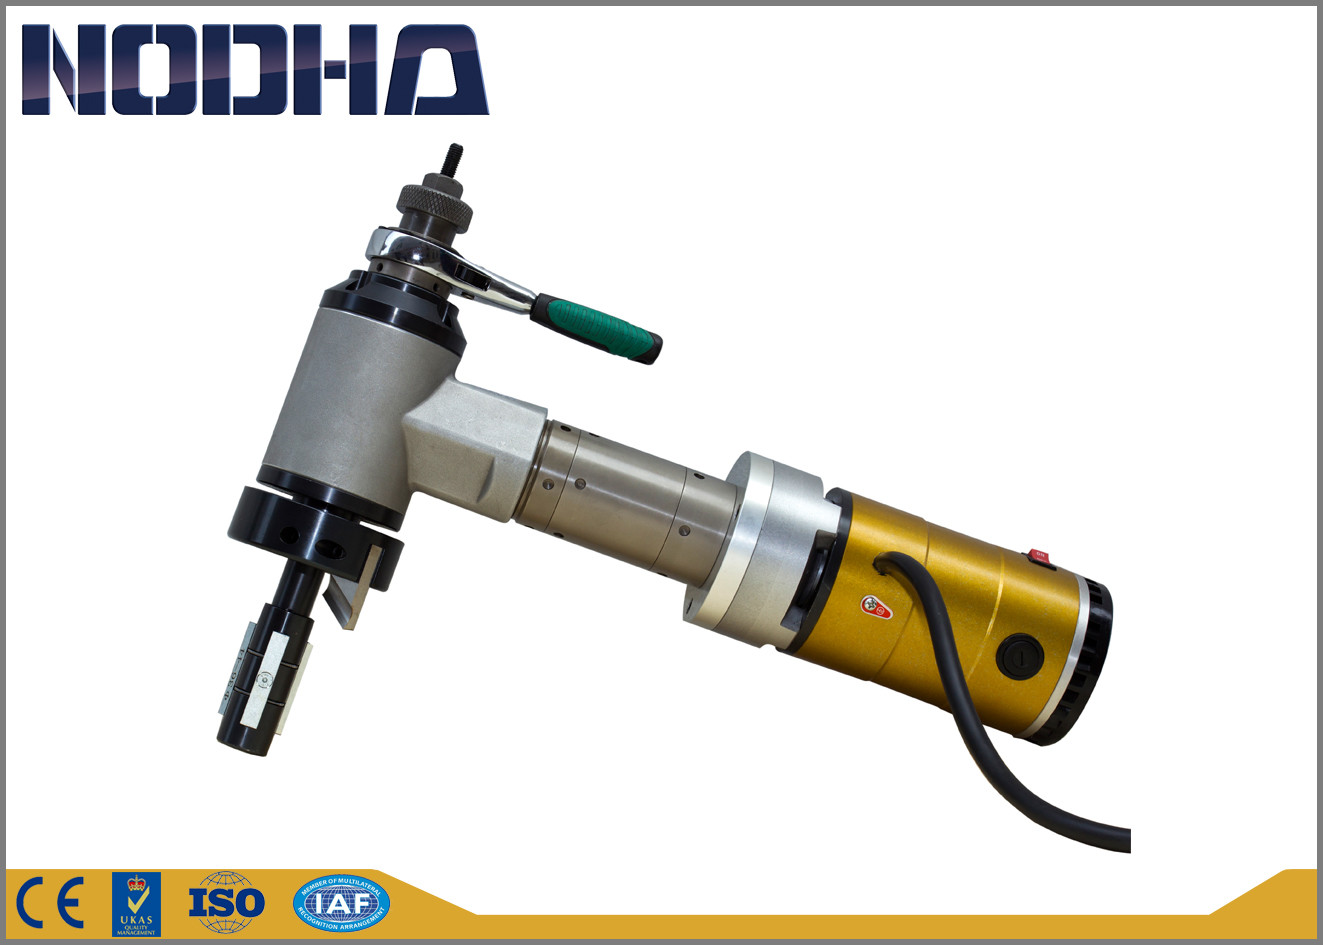 ID - Mounted Electric Driven Pipe End Beveling Machine NODHA Brand